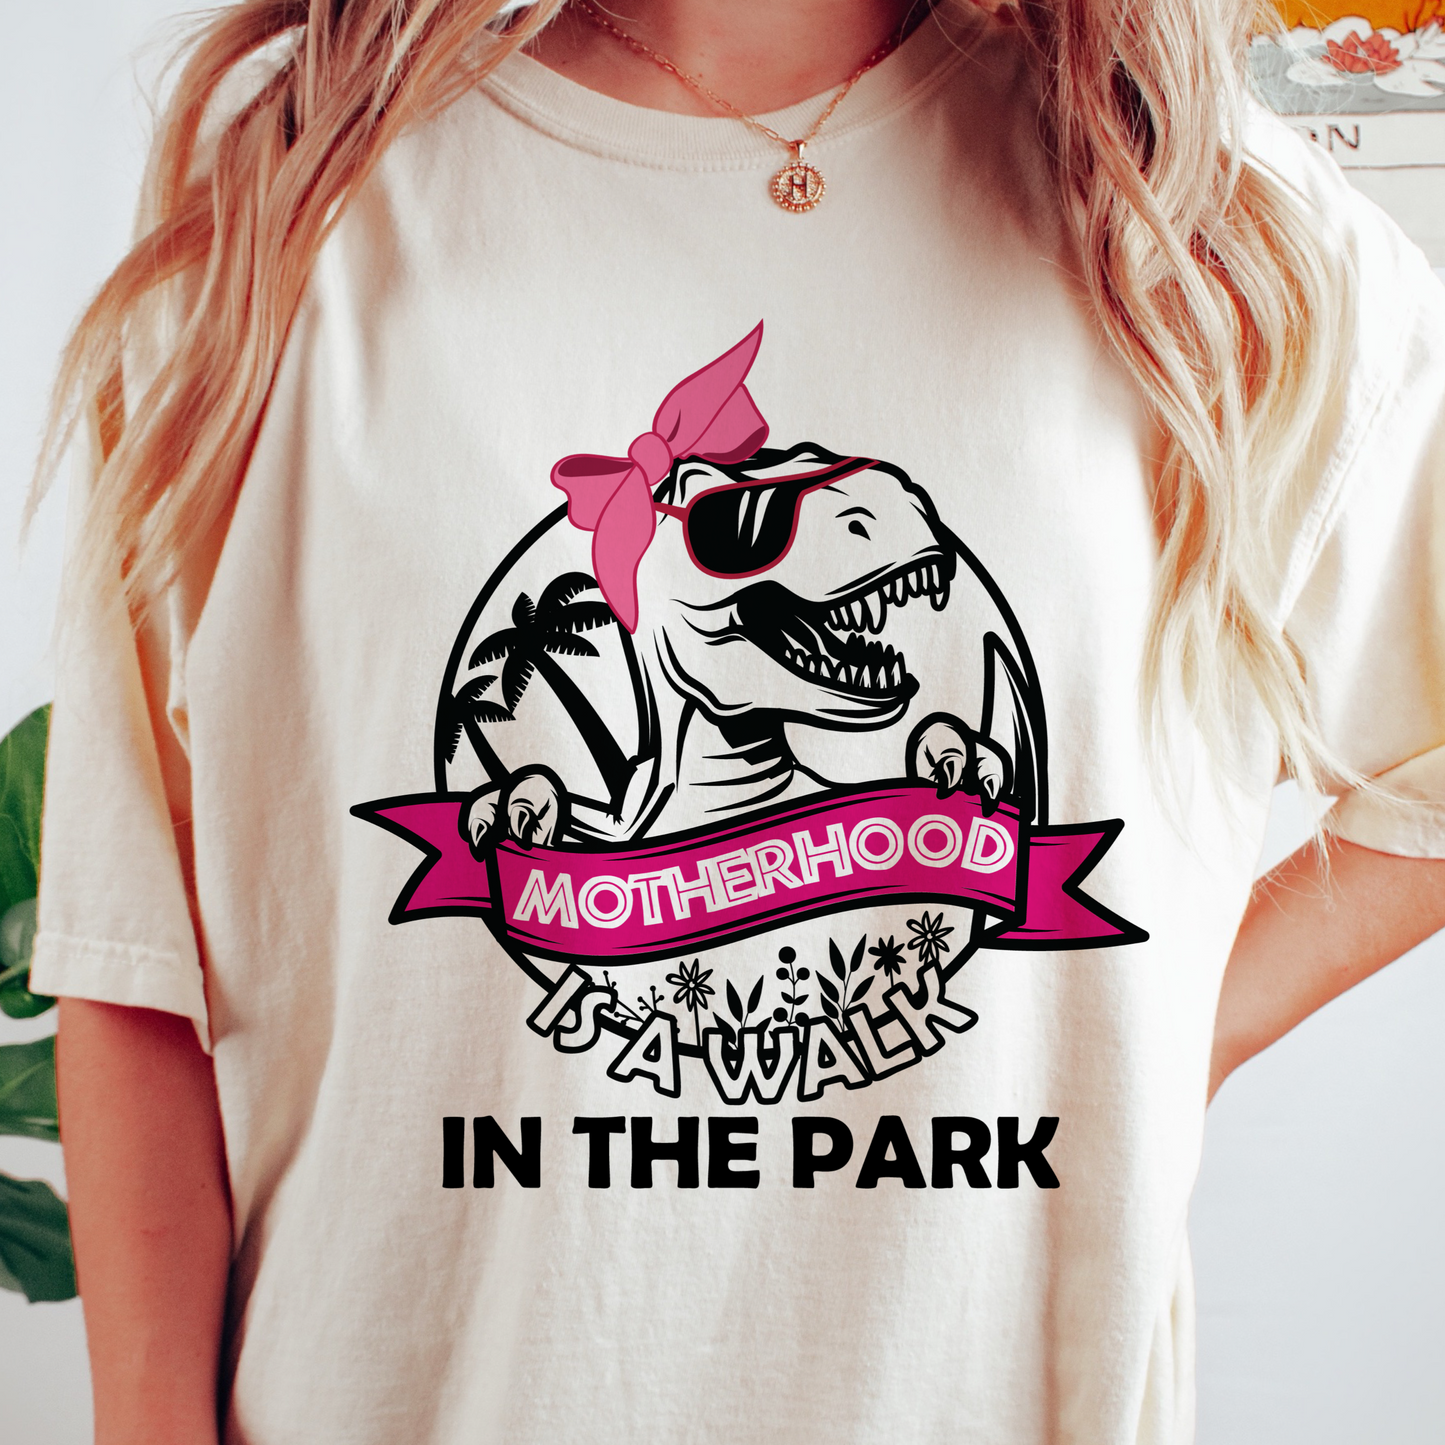 Motherhood is a walk in the park t shirt in Comfort Colors